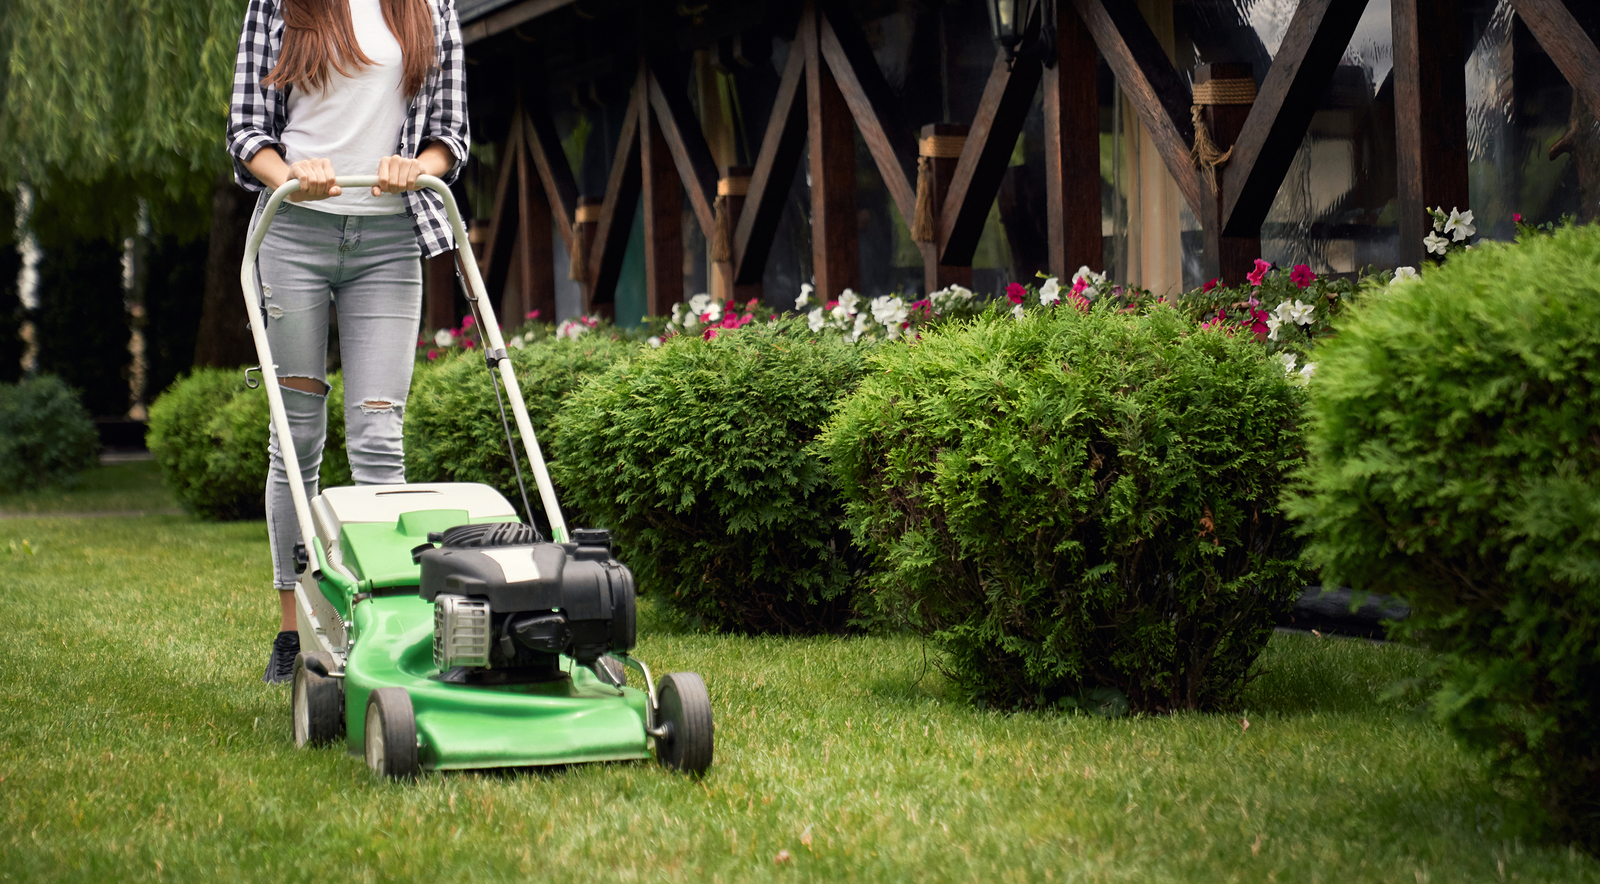 Horizontal Crop Of Woman In Casual Outfit Using Lawn Mower On Ba